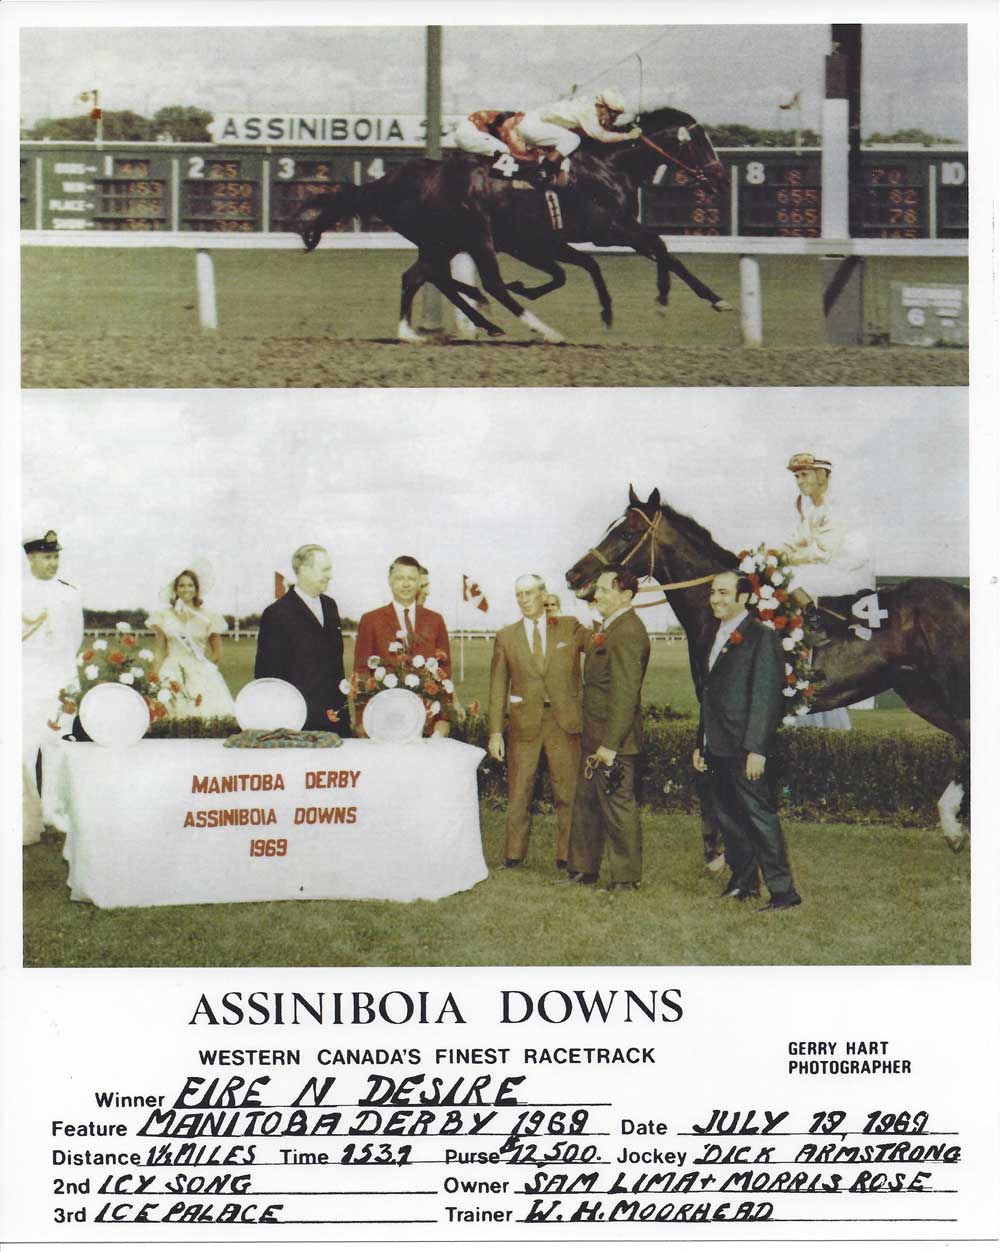 Fire N Desire wins 1969 Manitoba Derby. Dick Armstrong up.